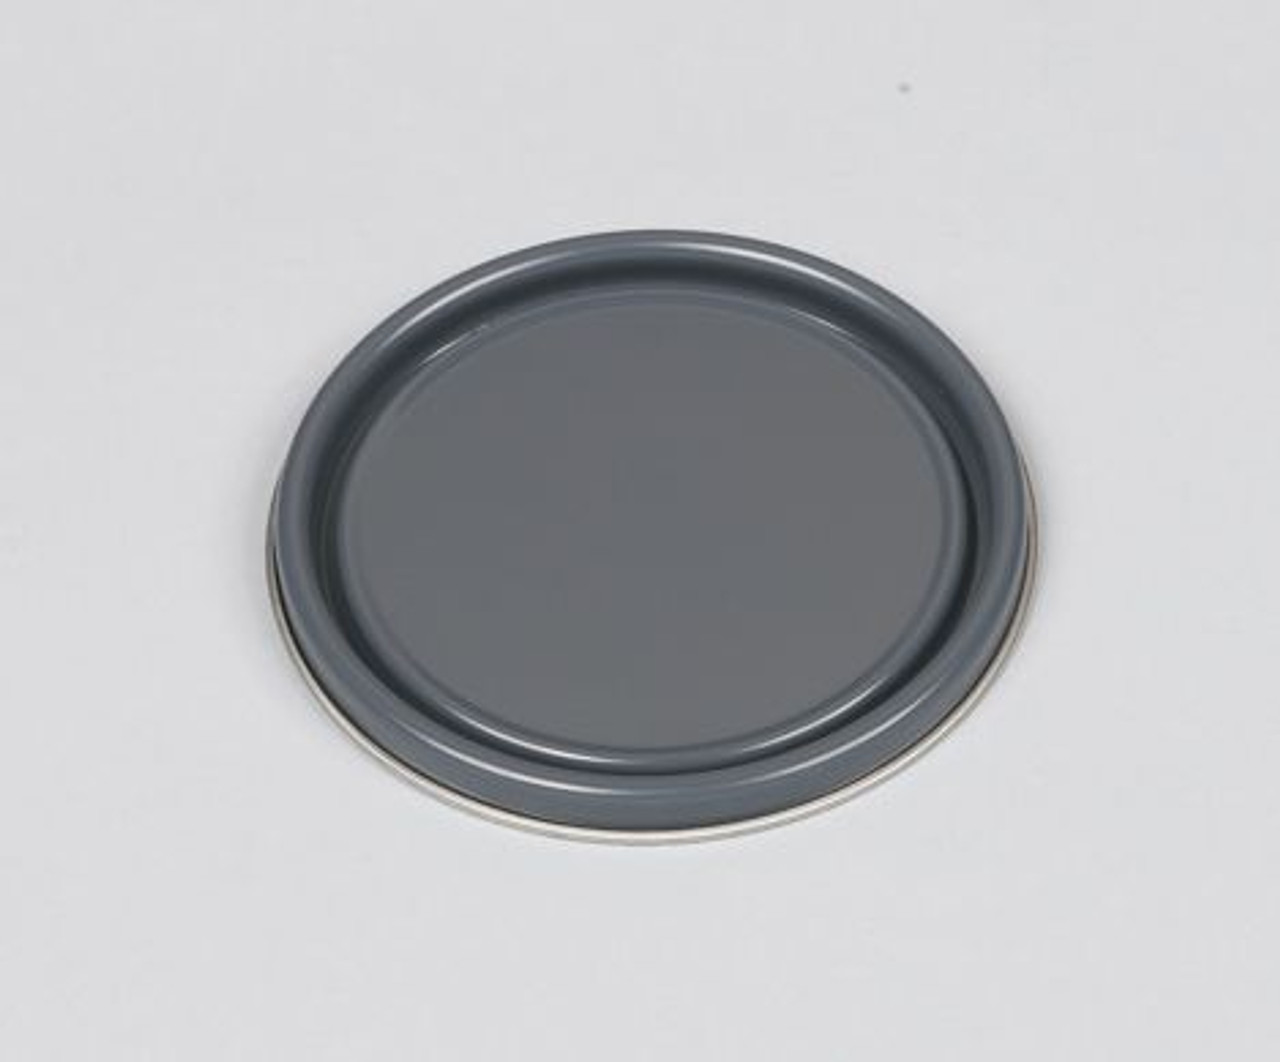 METAL LID FOR 1 QUART PAINT CAN LINED